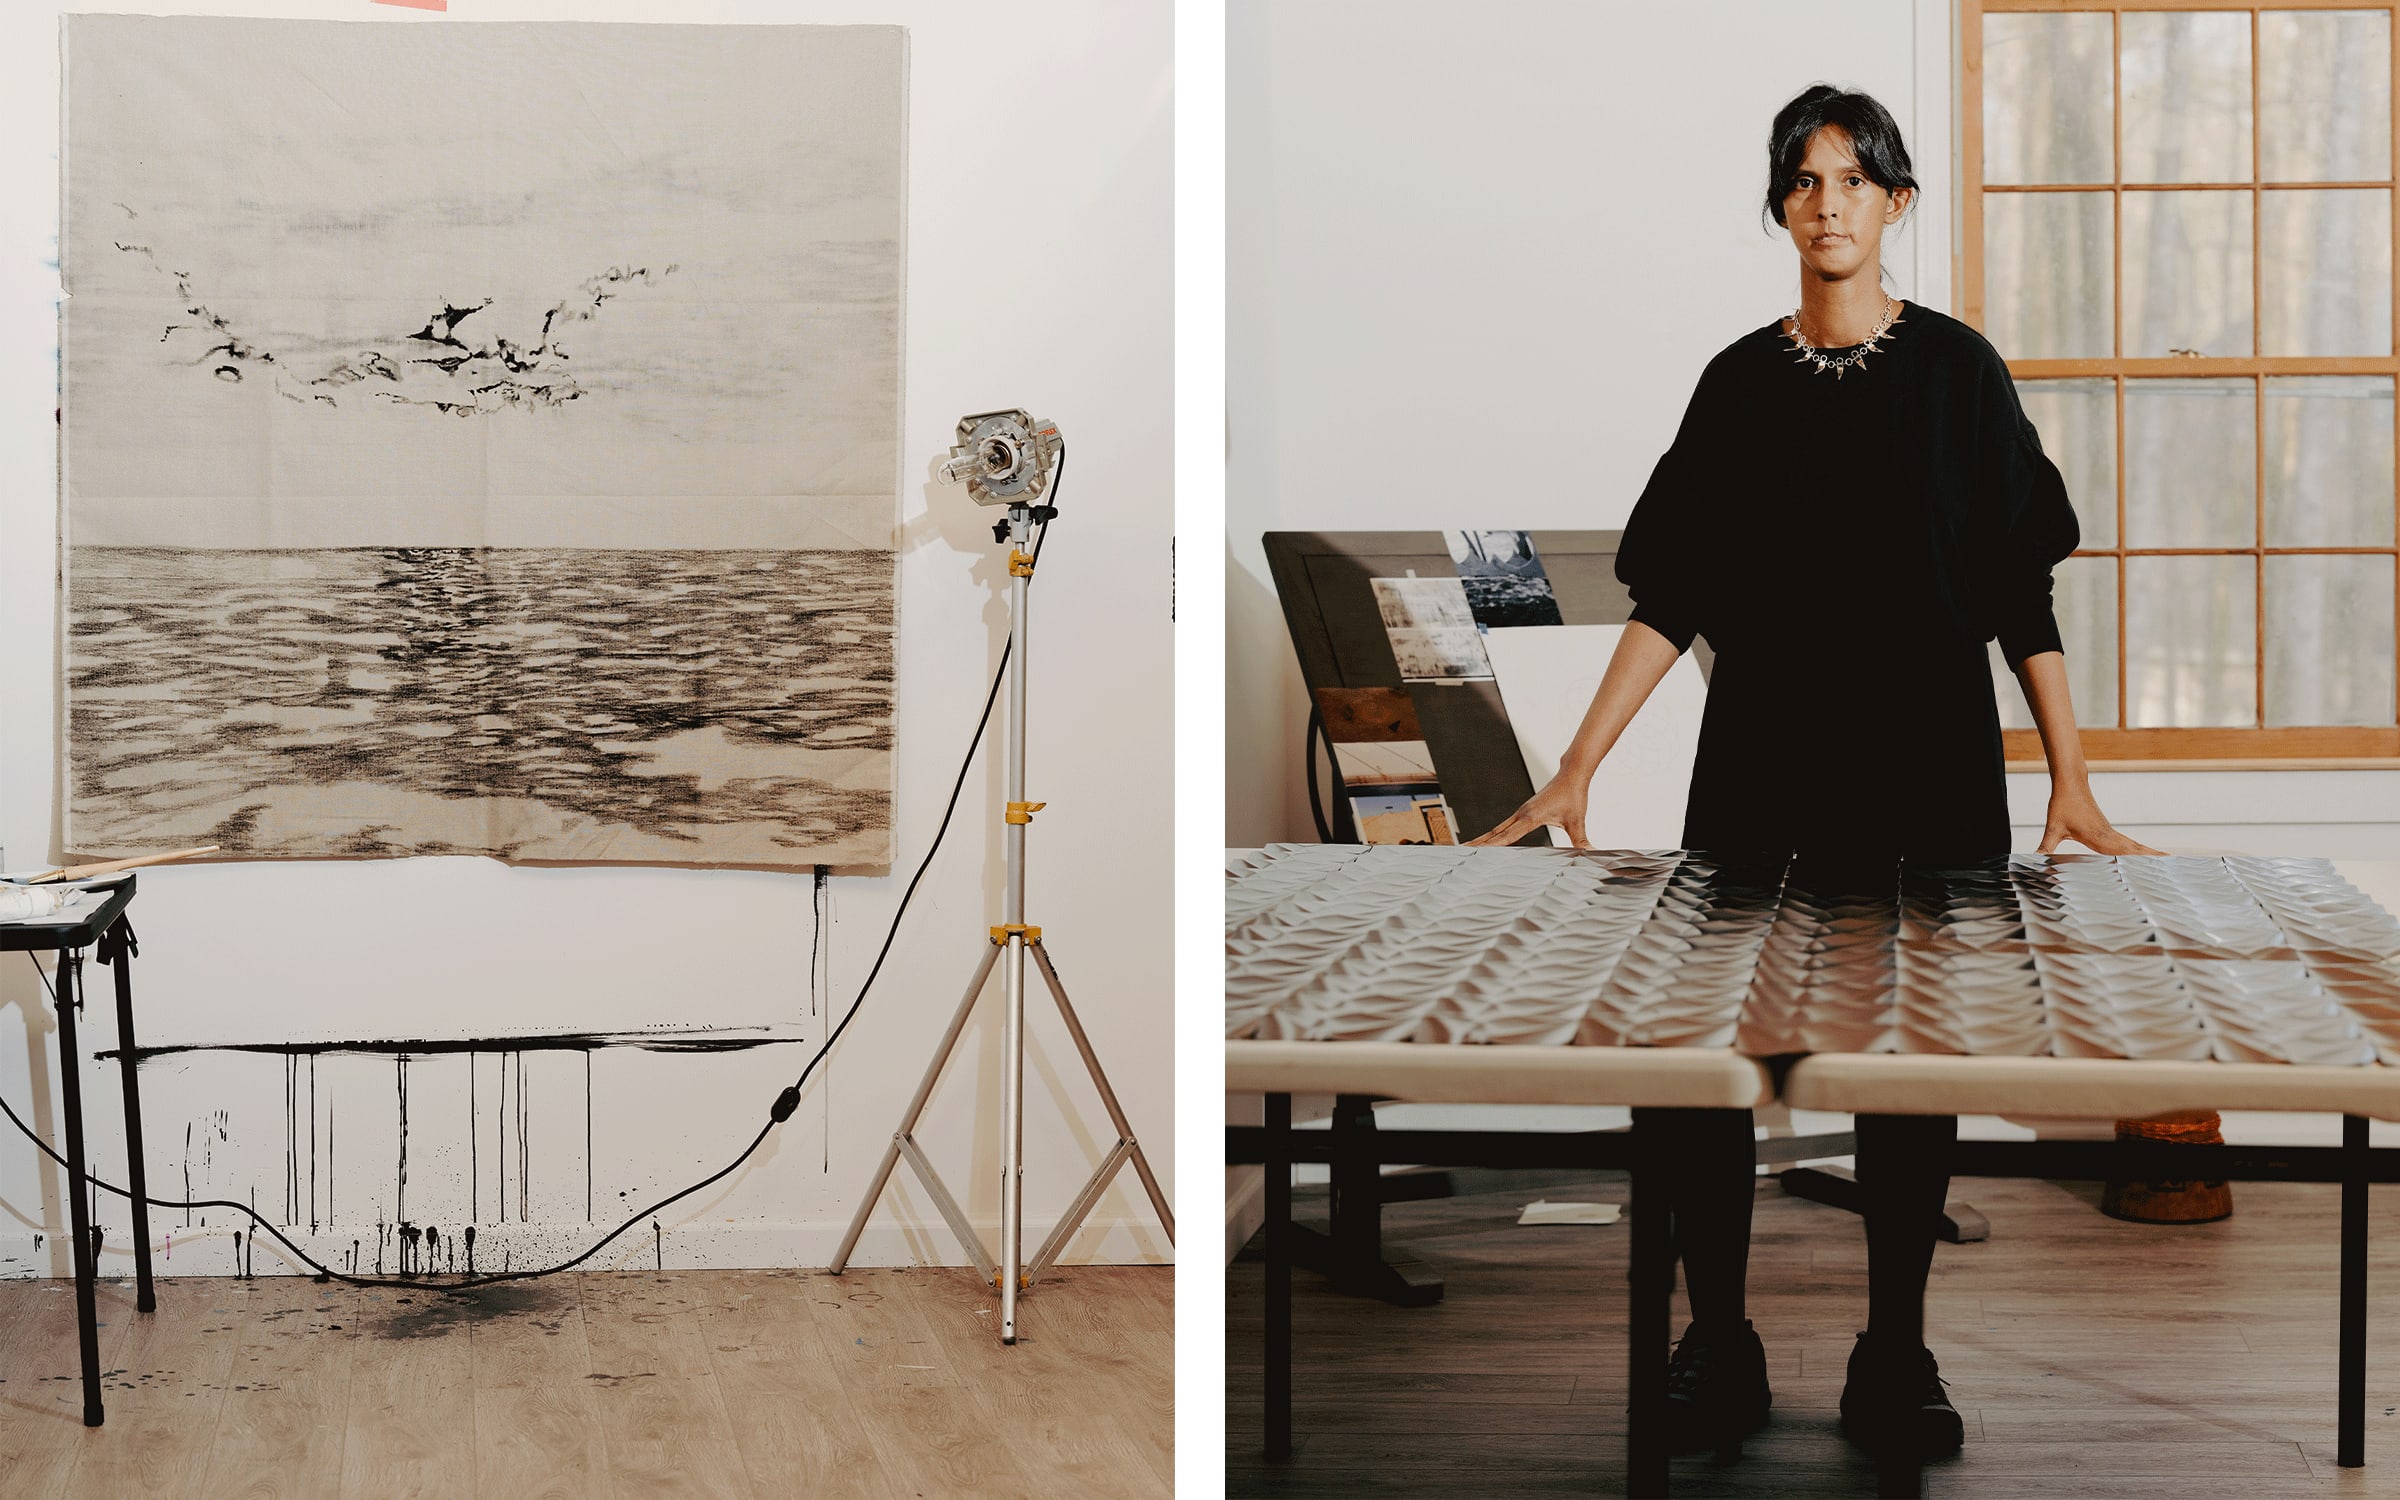 Ayesha Sultana in her studio. Photographs by Peyton Fulford for Art Basel.